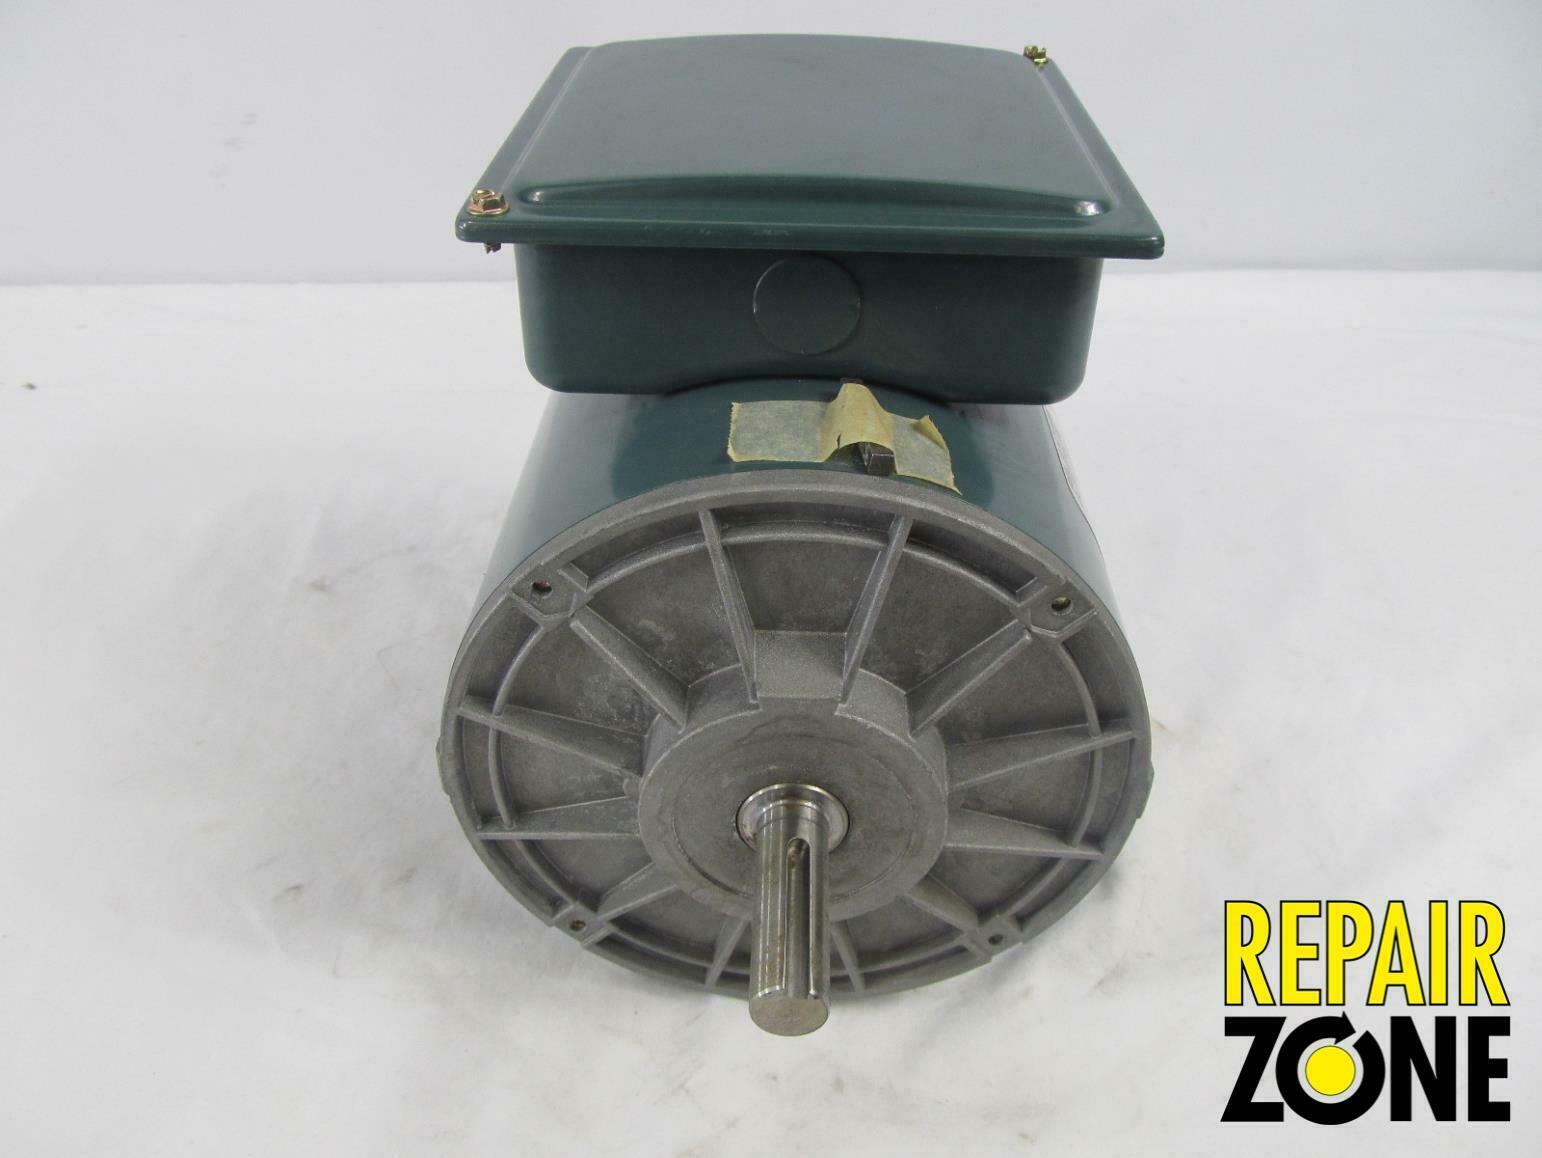 P56X1310 RELIANCE 3 PHASE MOTOR TESTED 